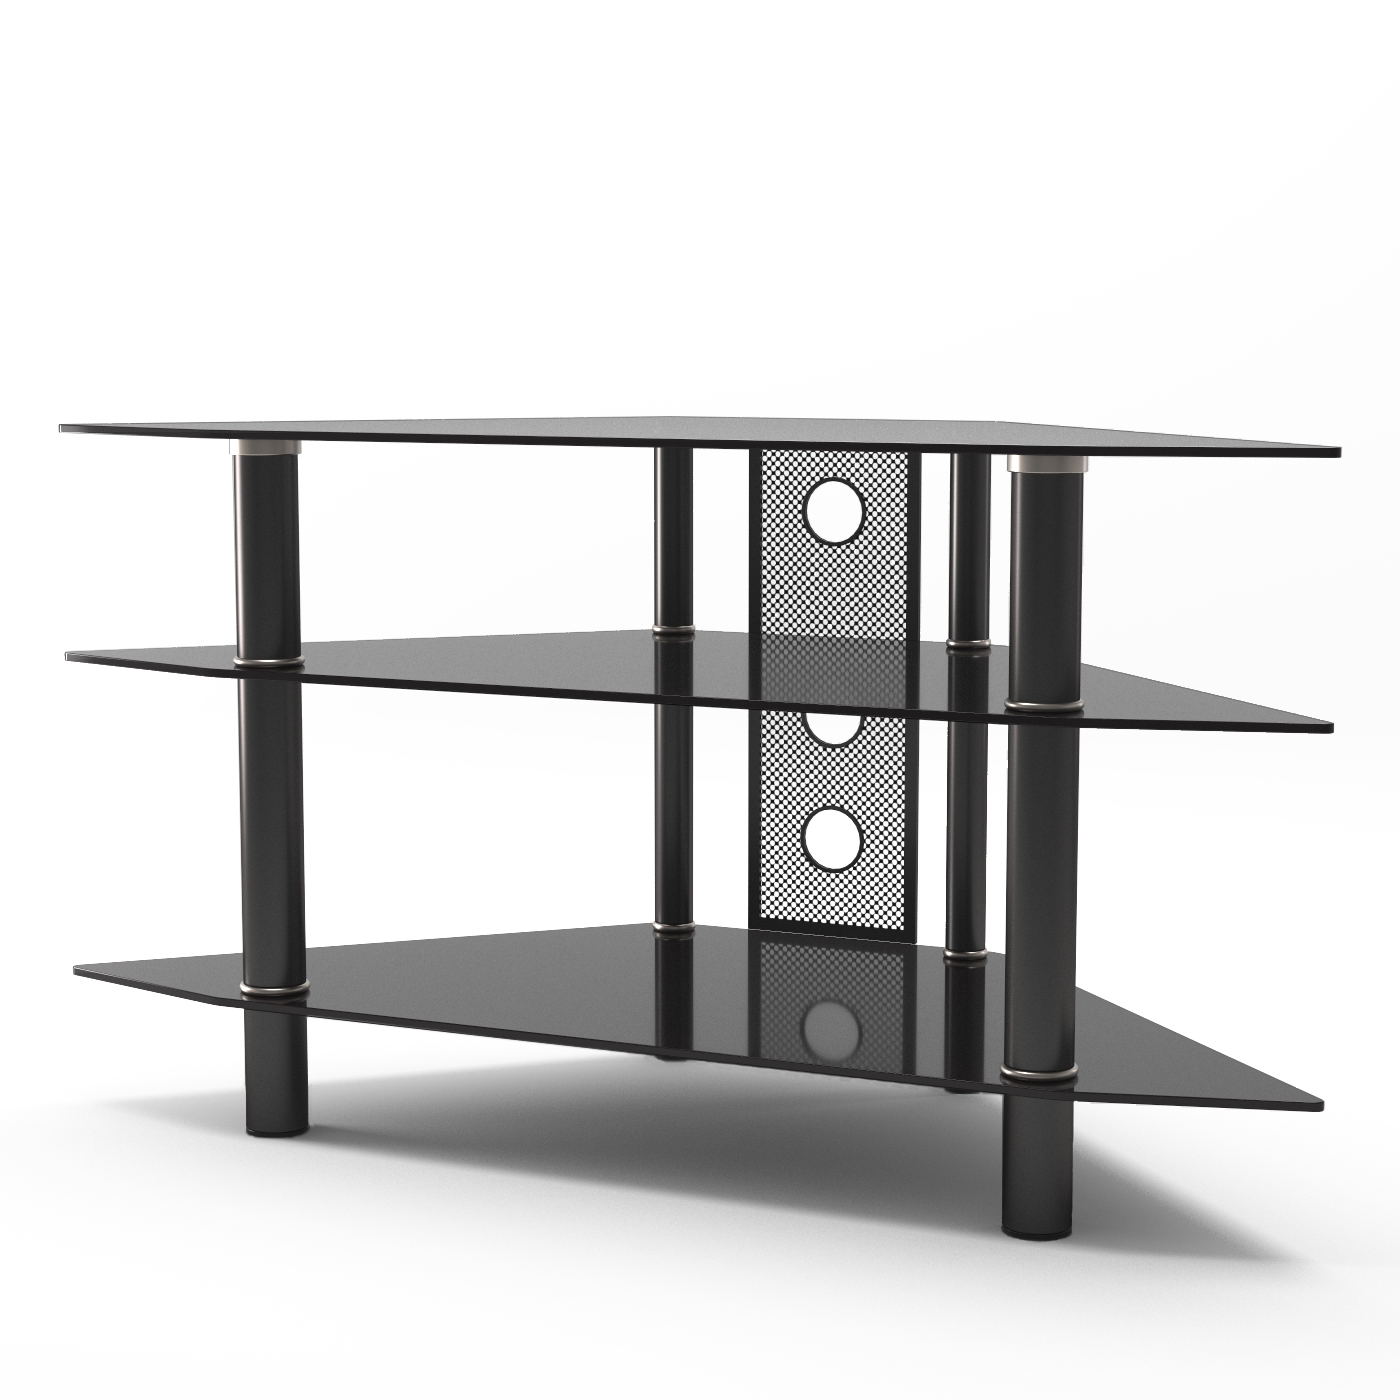 6 Functional Reasons To Choose Black Glass Corner TV Stand With Doors